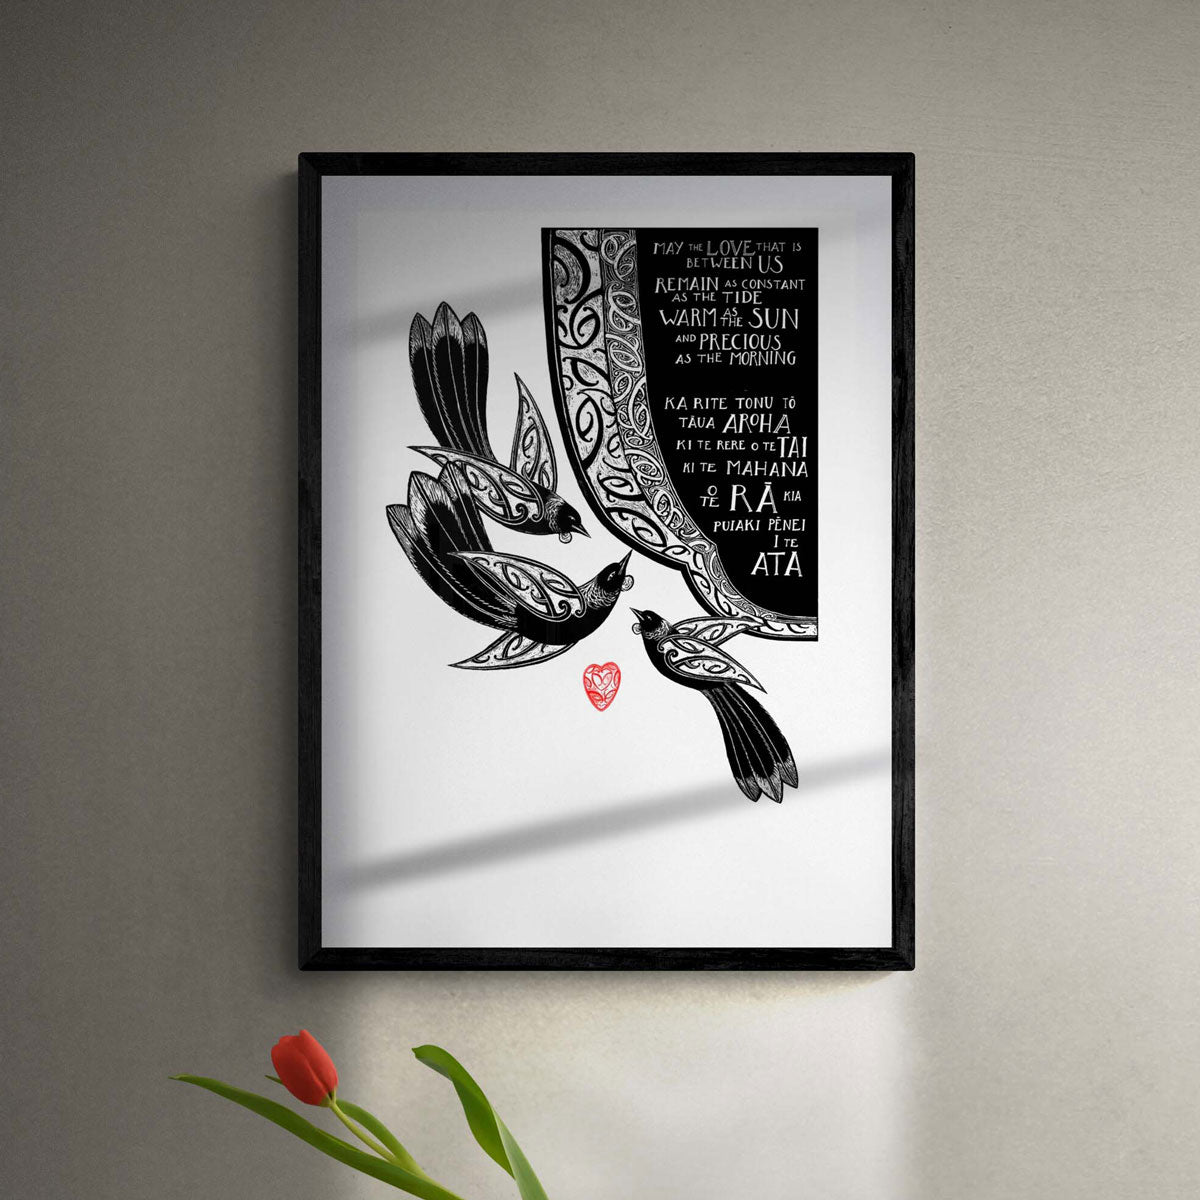 Framed Karakia 3 print - May the love that is between us remain as constant as the tide, as warm as the sun, and as precious as the morning. Maori art design tui birds and aroha love heart with words in te reo Maori and english translation Limited edition fine art by Amber Smith nz artist.